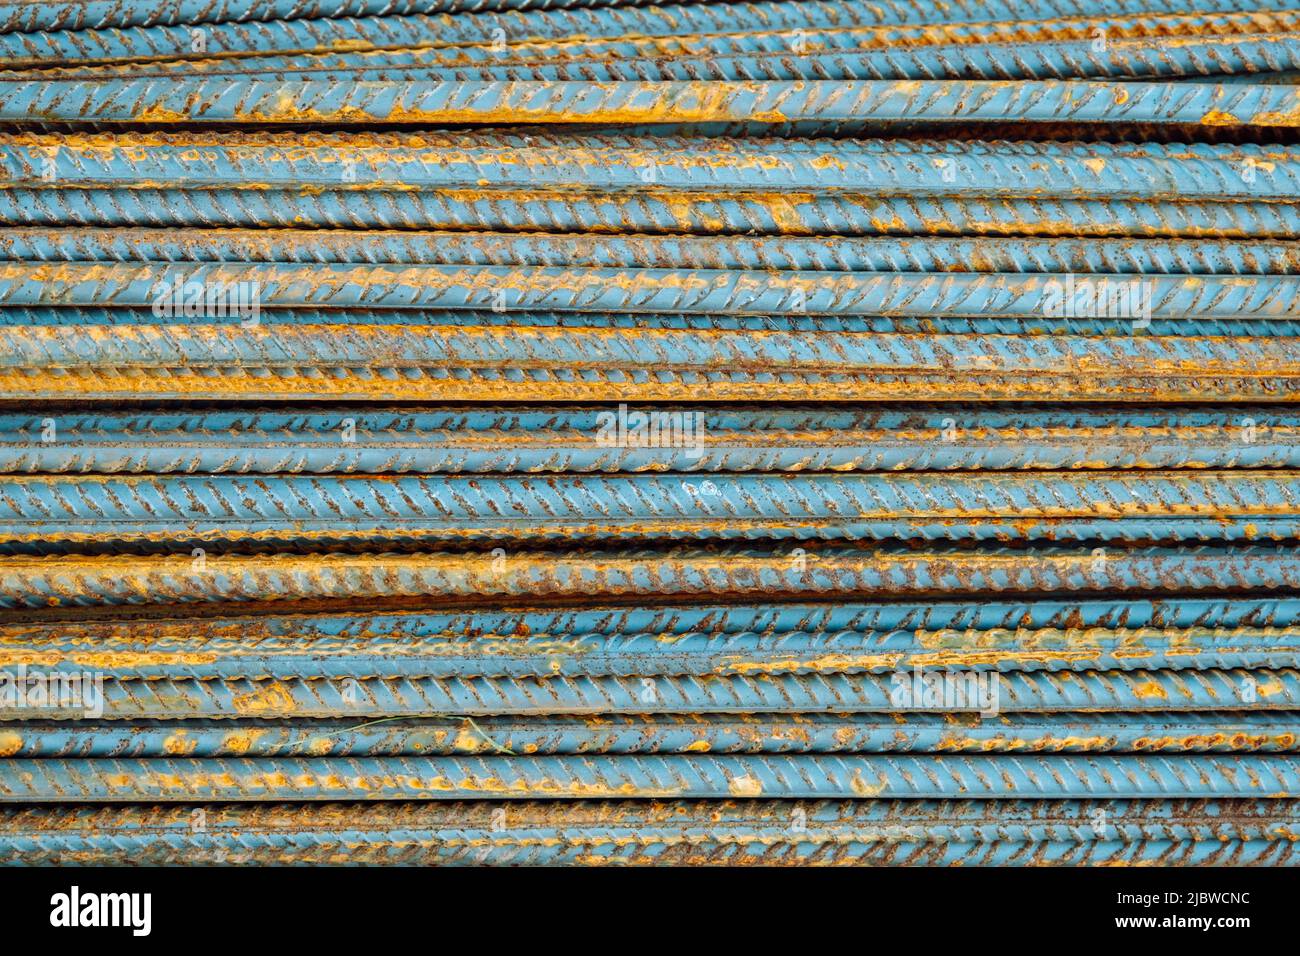 Metal fittings for reinforced concrete. Main construction materials. Background and rusty iron reinforcement rods. Red orange color of iron oxide on r Stock Photo